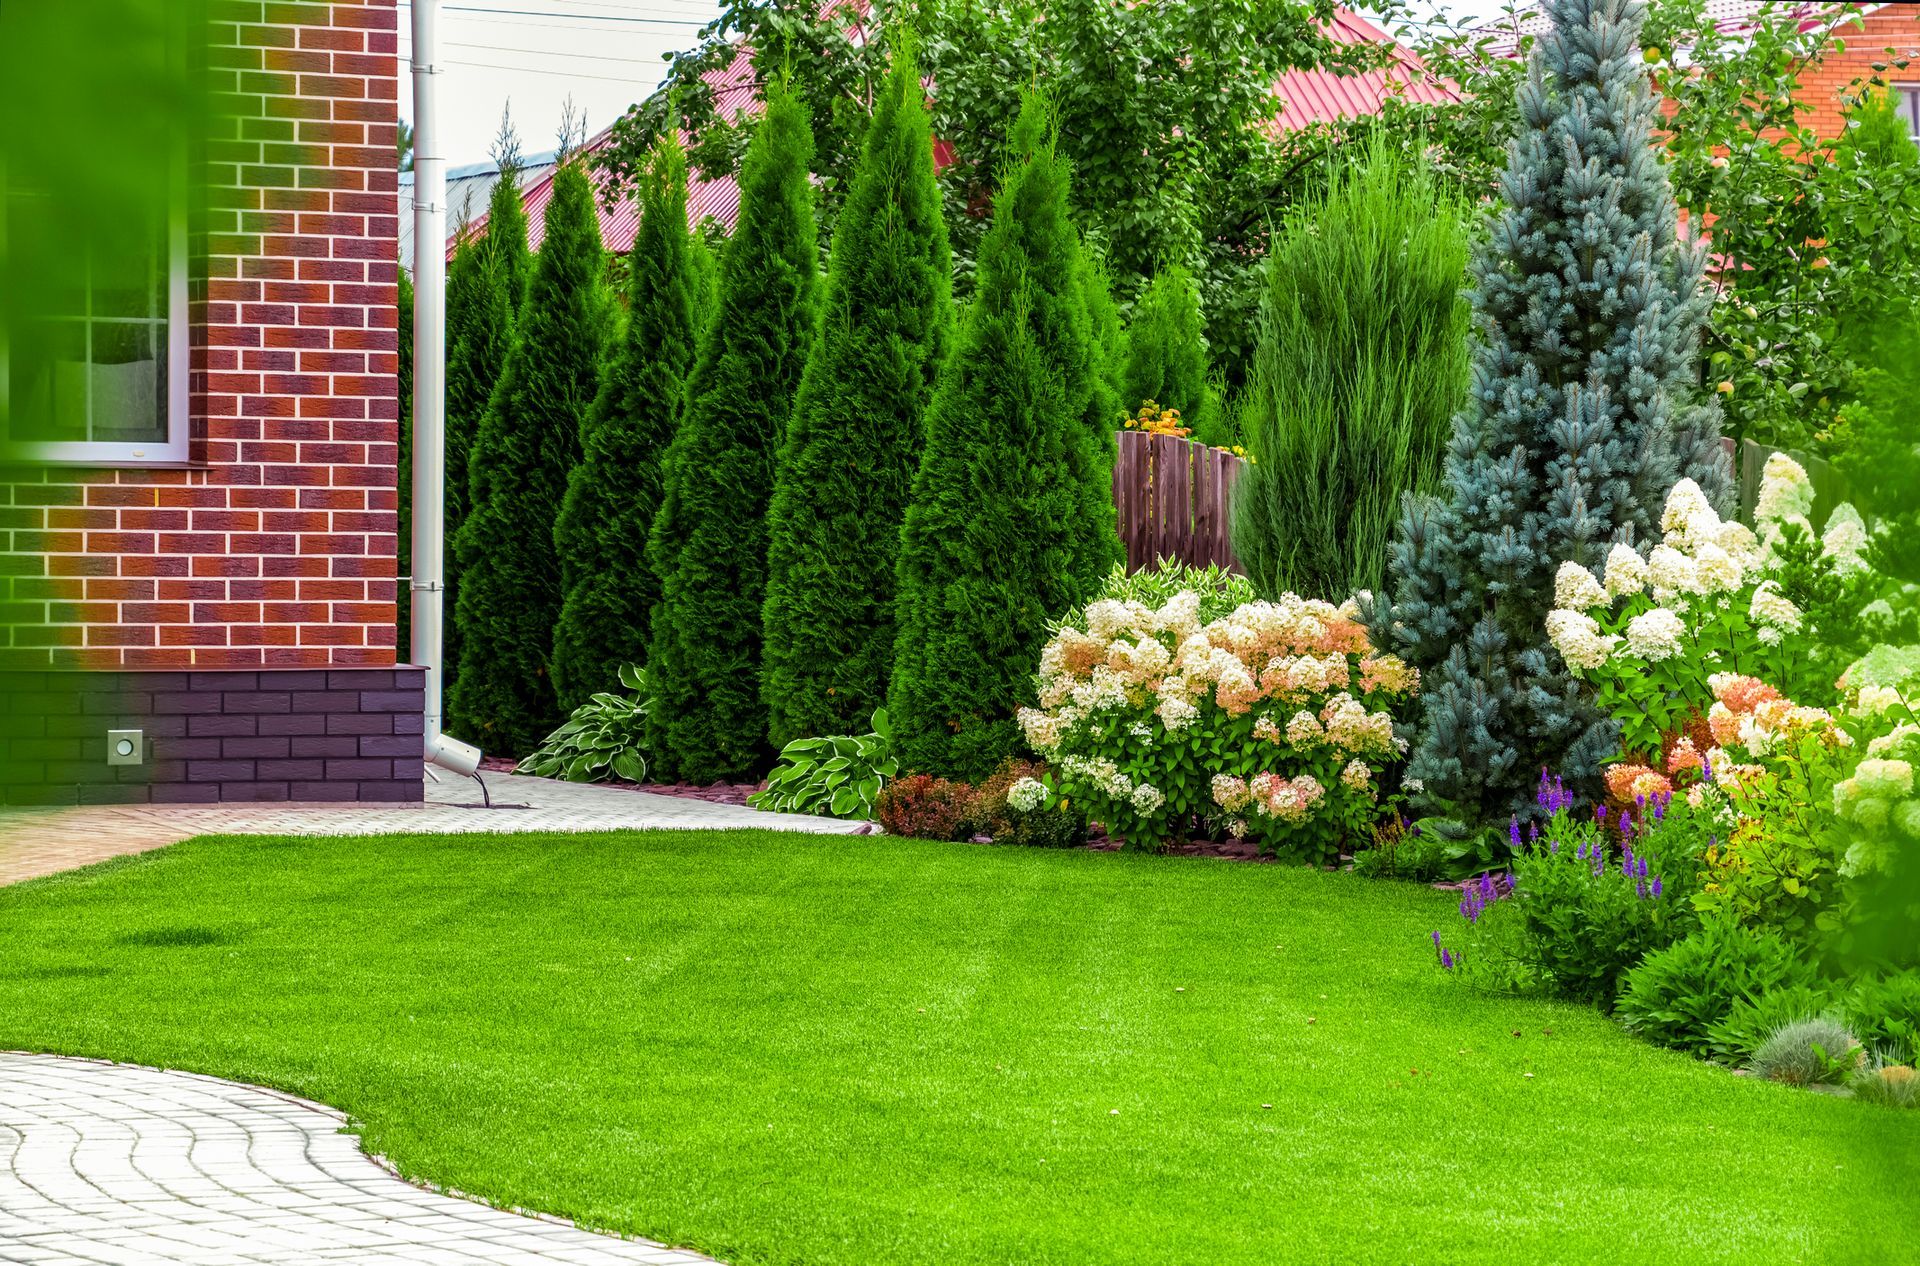 A Lush Green Yard with Trees and Flowers in Front of A Brick House - Kinston, NC - Garden Gator Landscape & Design